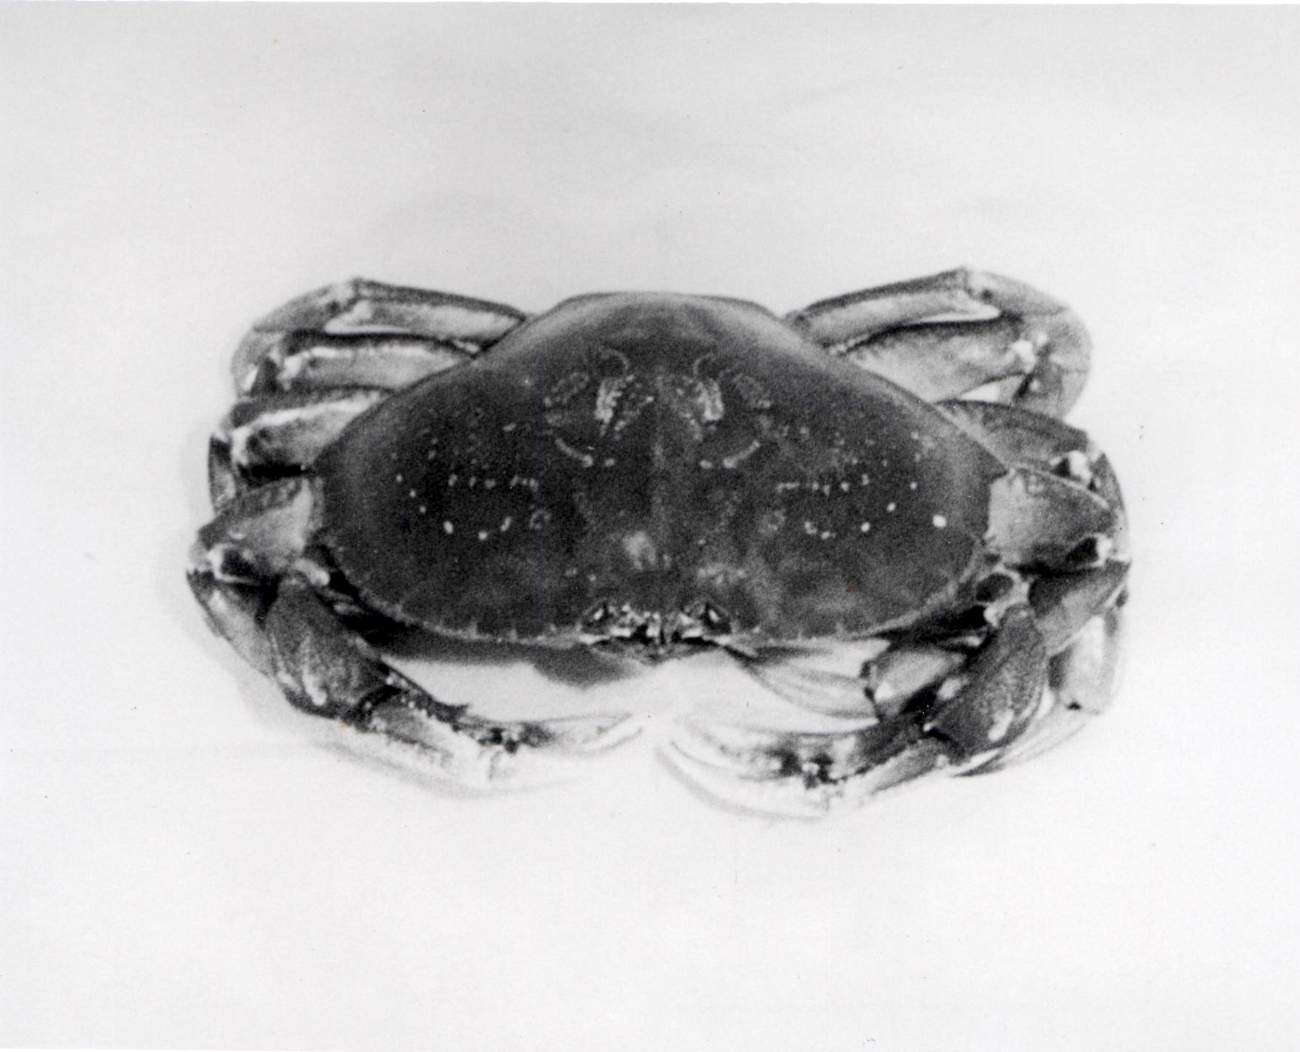 Large male dungeness crab